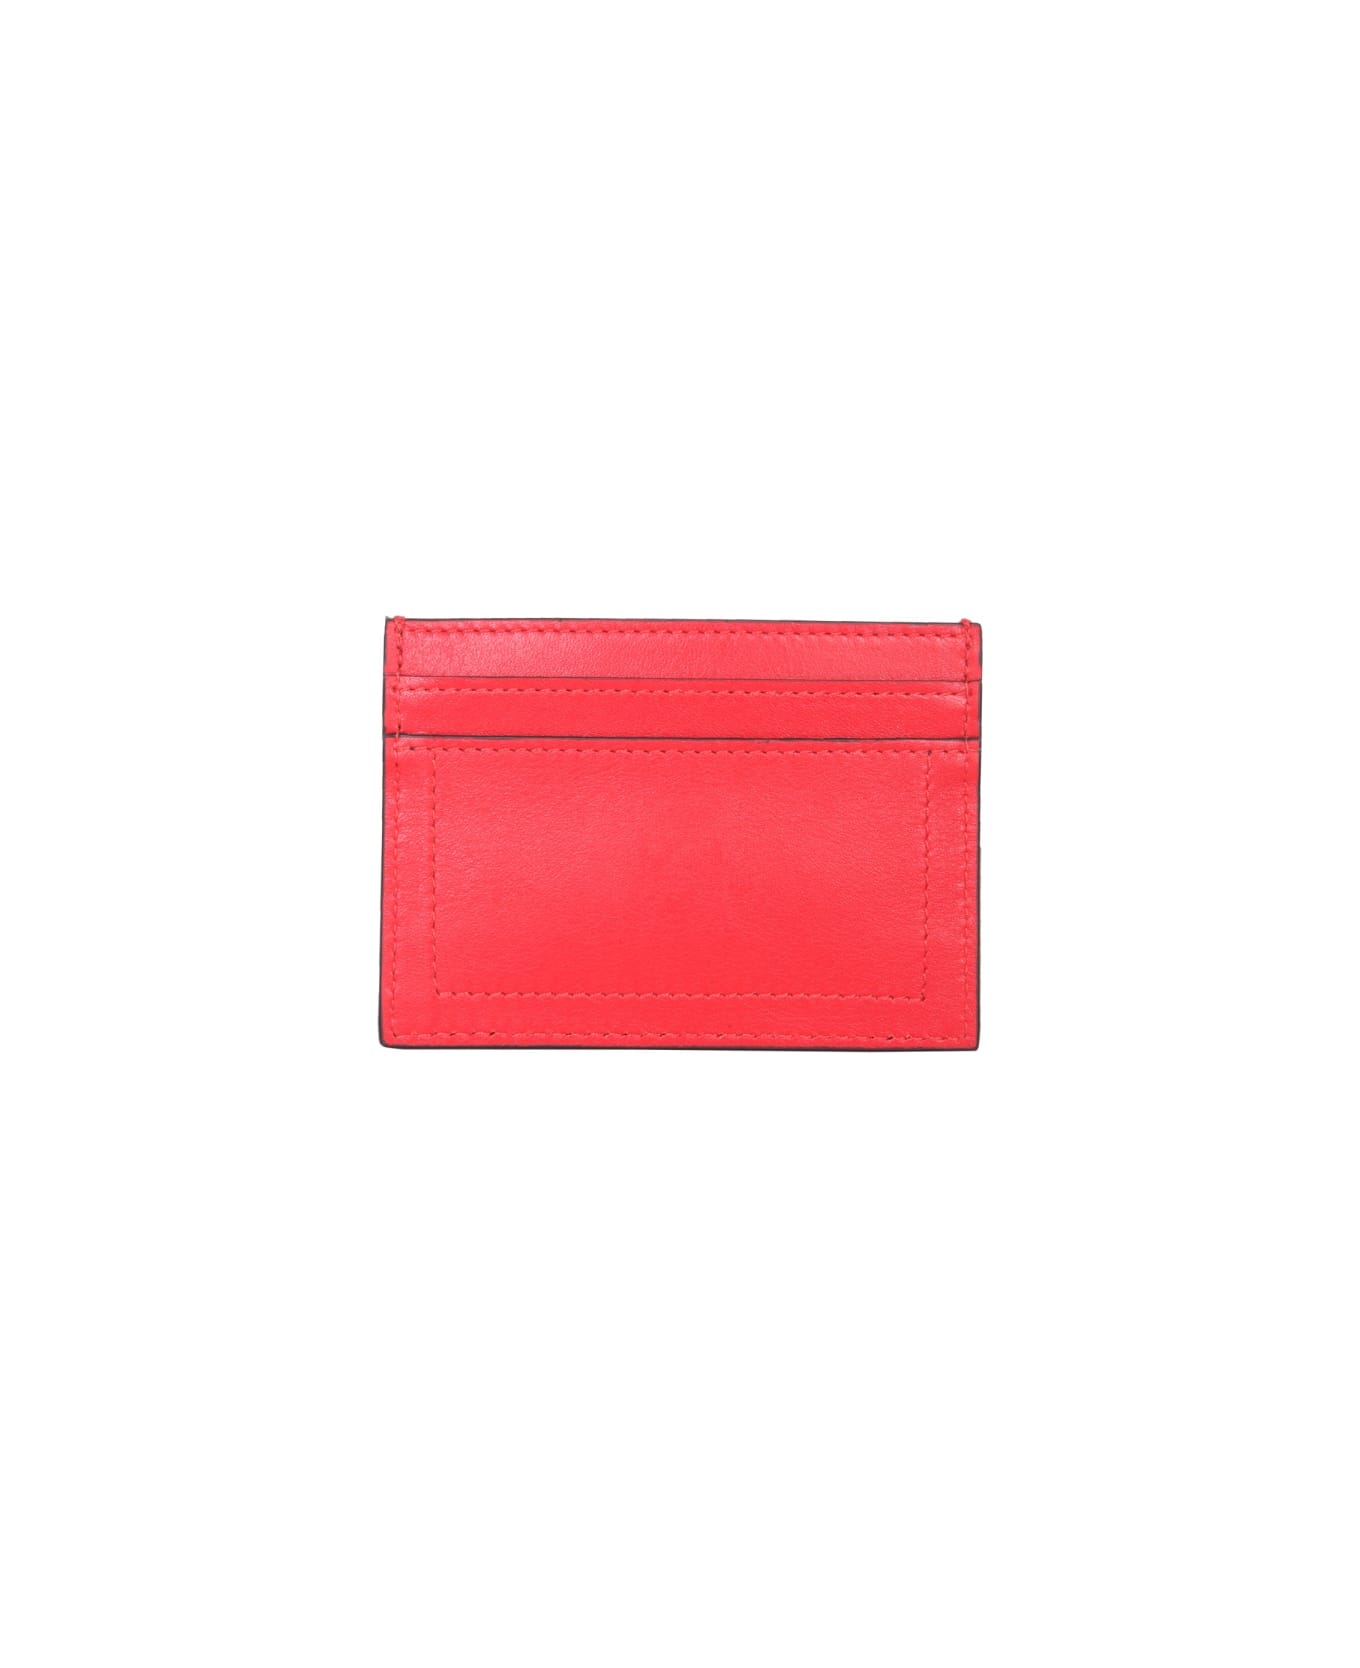 Moschino Leather Card Holder - RED 財布